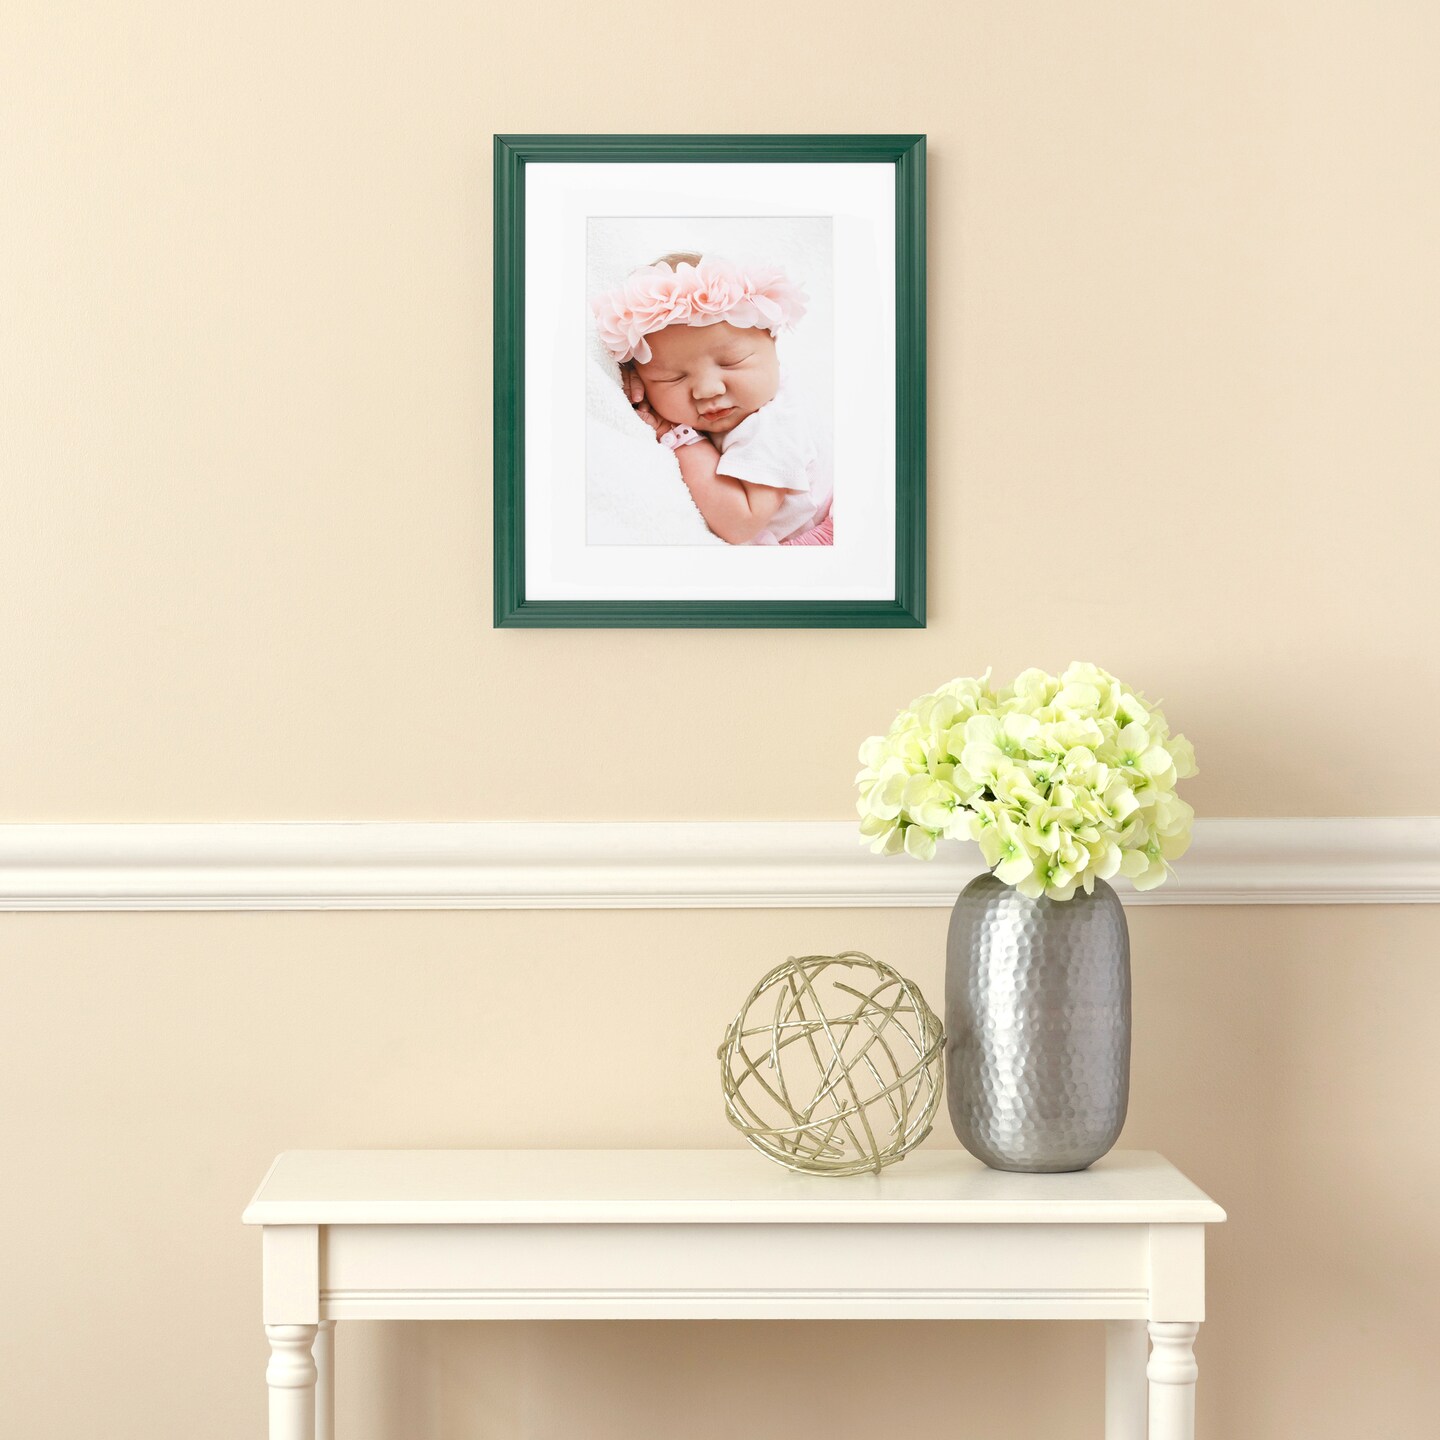 ArtToFrames 15x20 Inch  Picture Frame, This 1 Inch Custom Wood Poster Frame is Available in Multiple Colors, Great for Your Art or Photos - Comes with Regular Glass and  Corrugated Backing (A9LB)